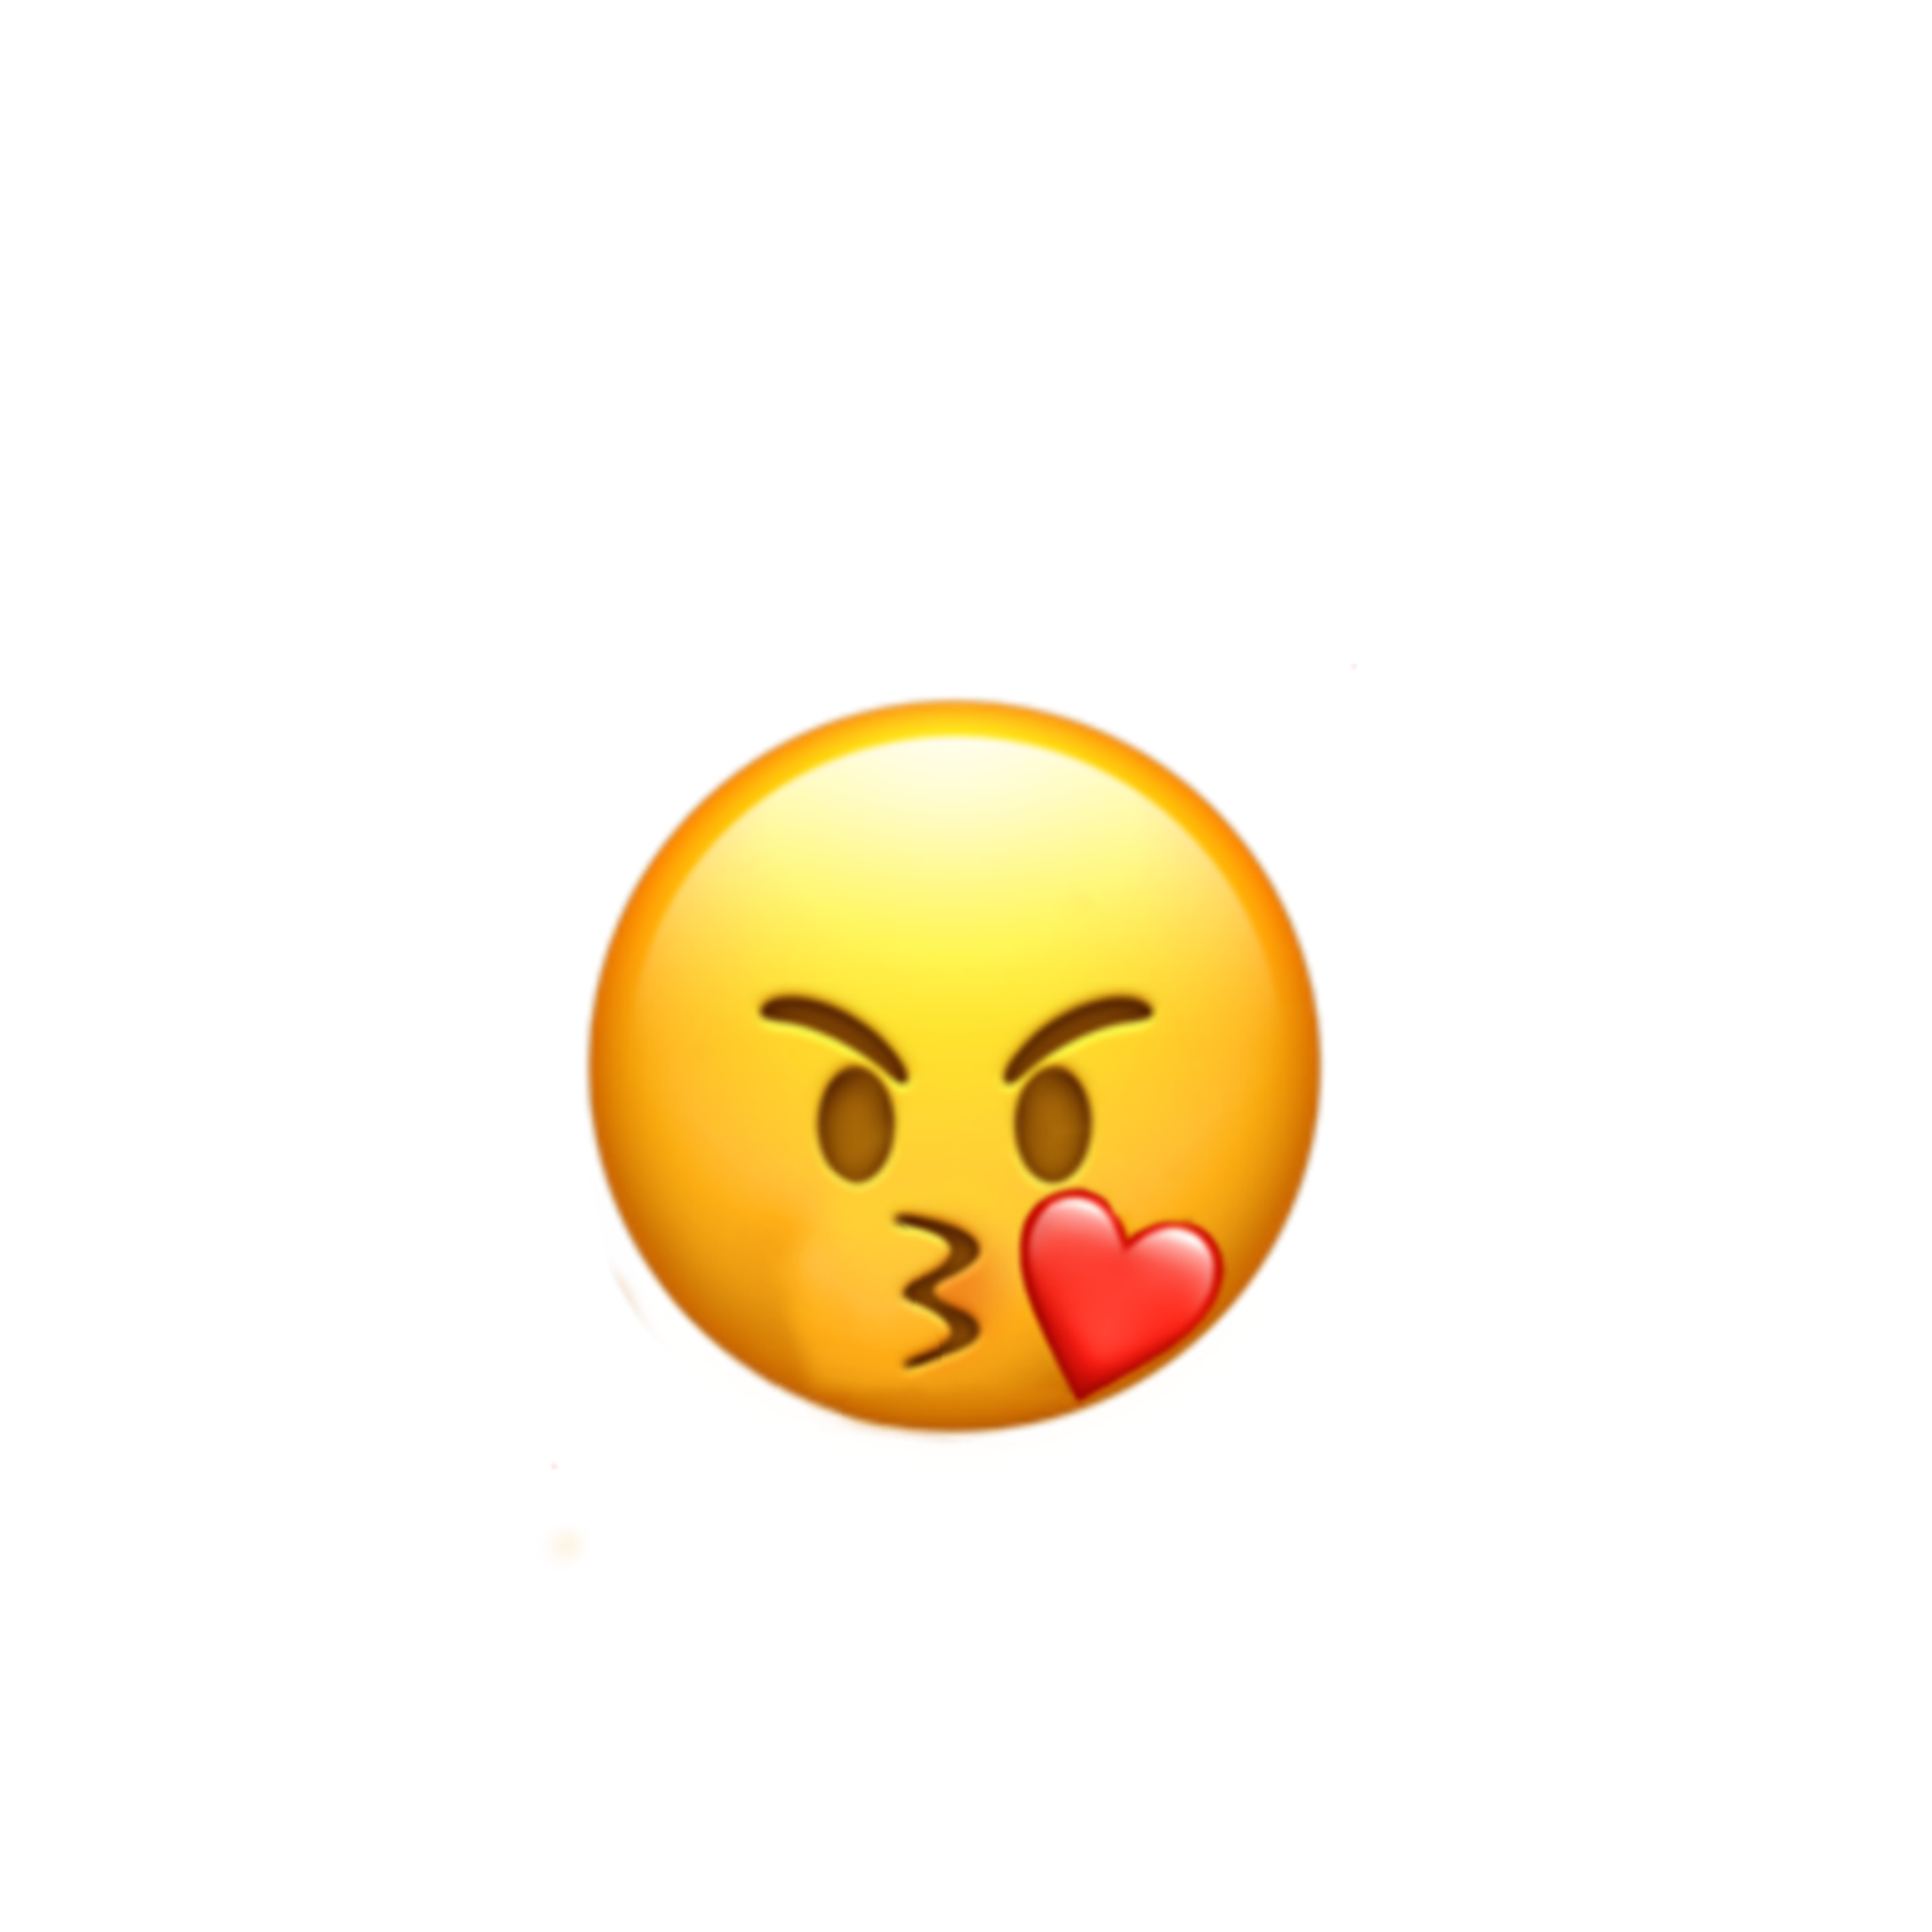 smiley emoji iphone angry kiss sticker by @marion457.